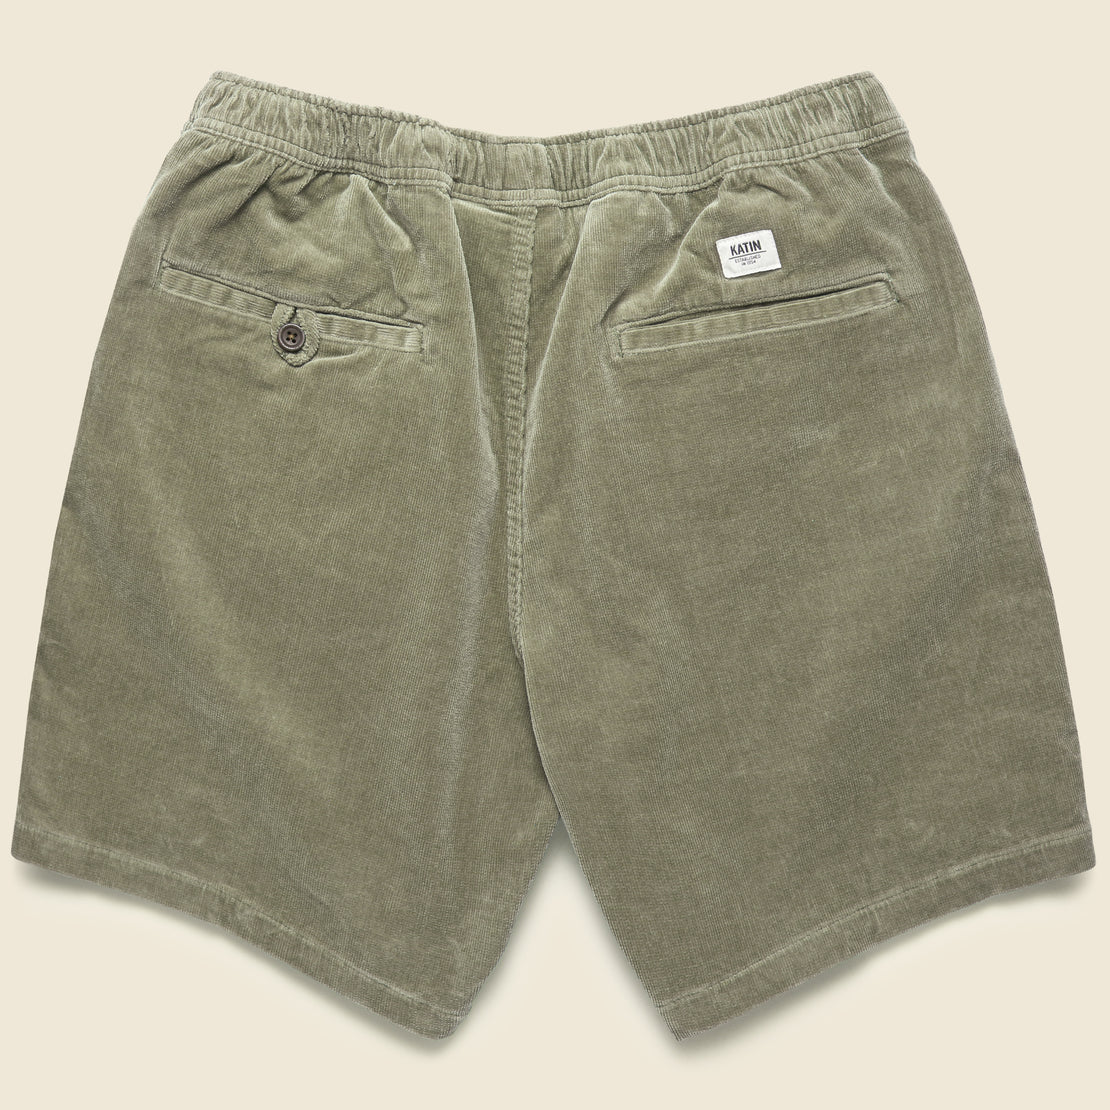 Trails Cord Short - Light Gray - Katin - STAG Provisions - Shorts - Lounge